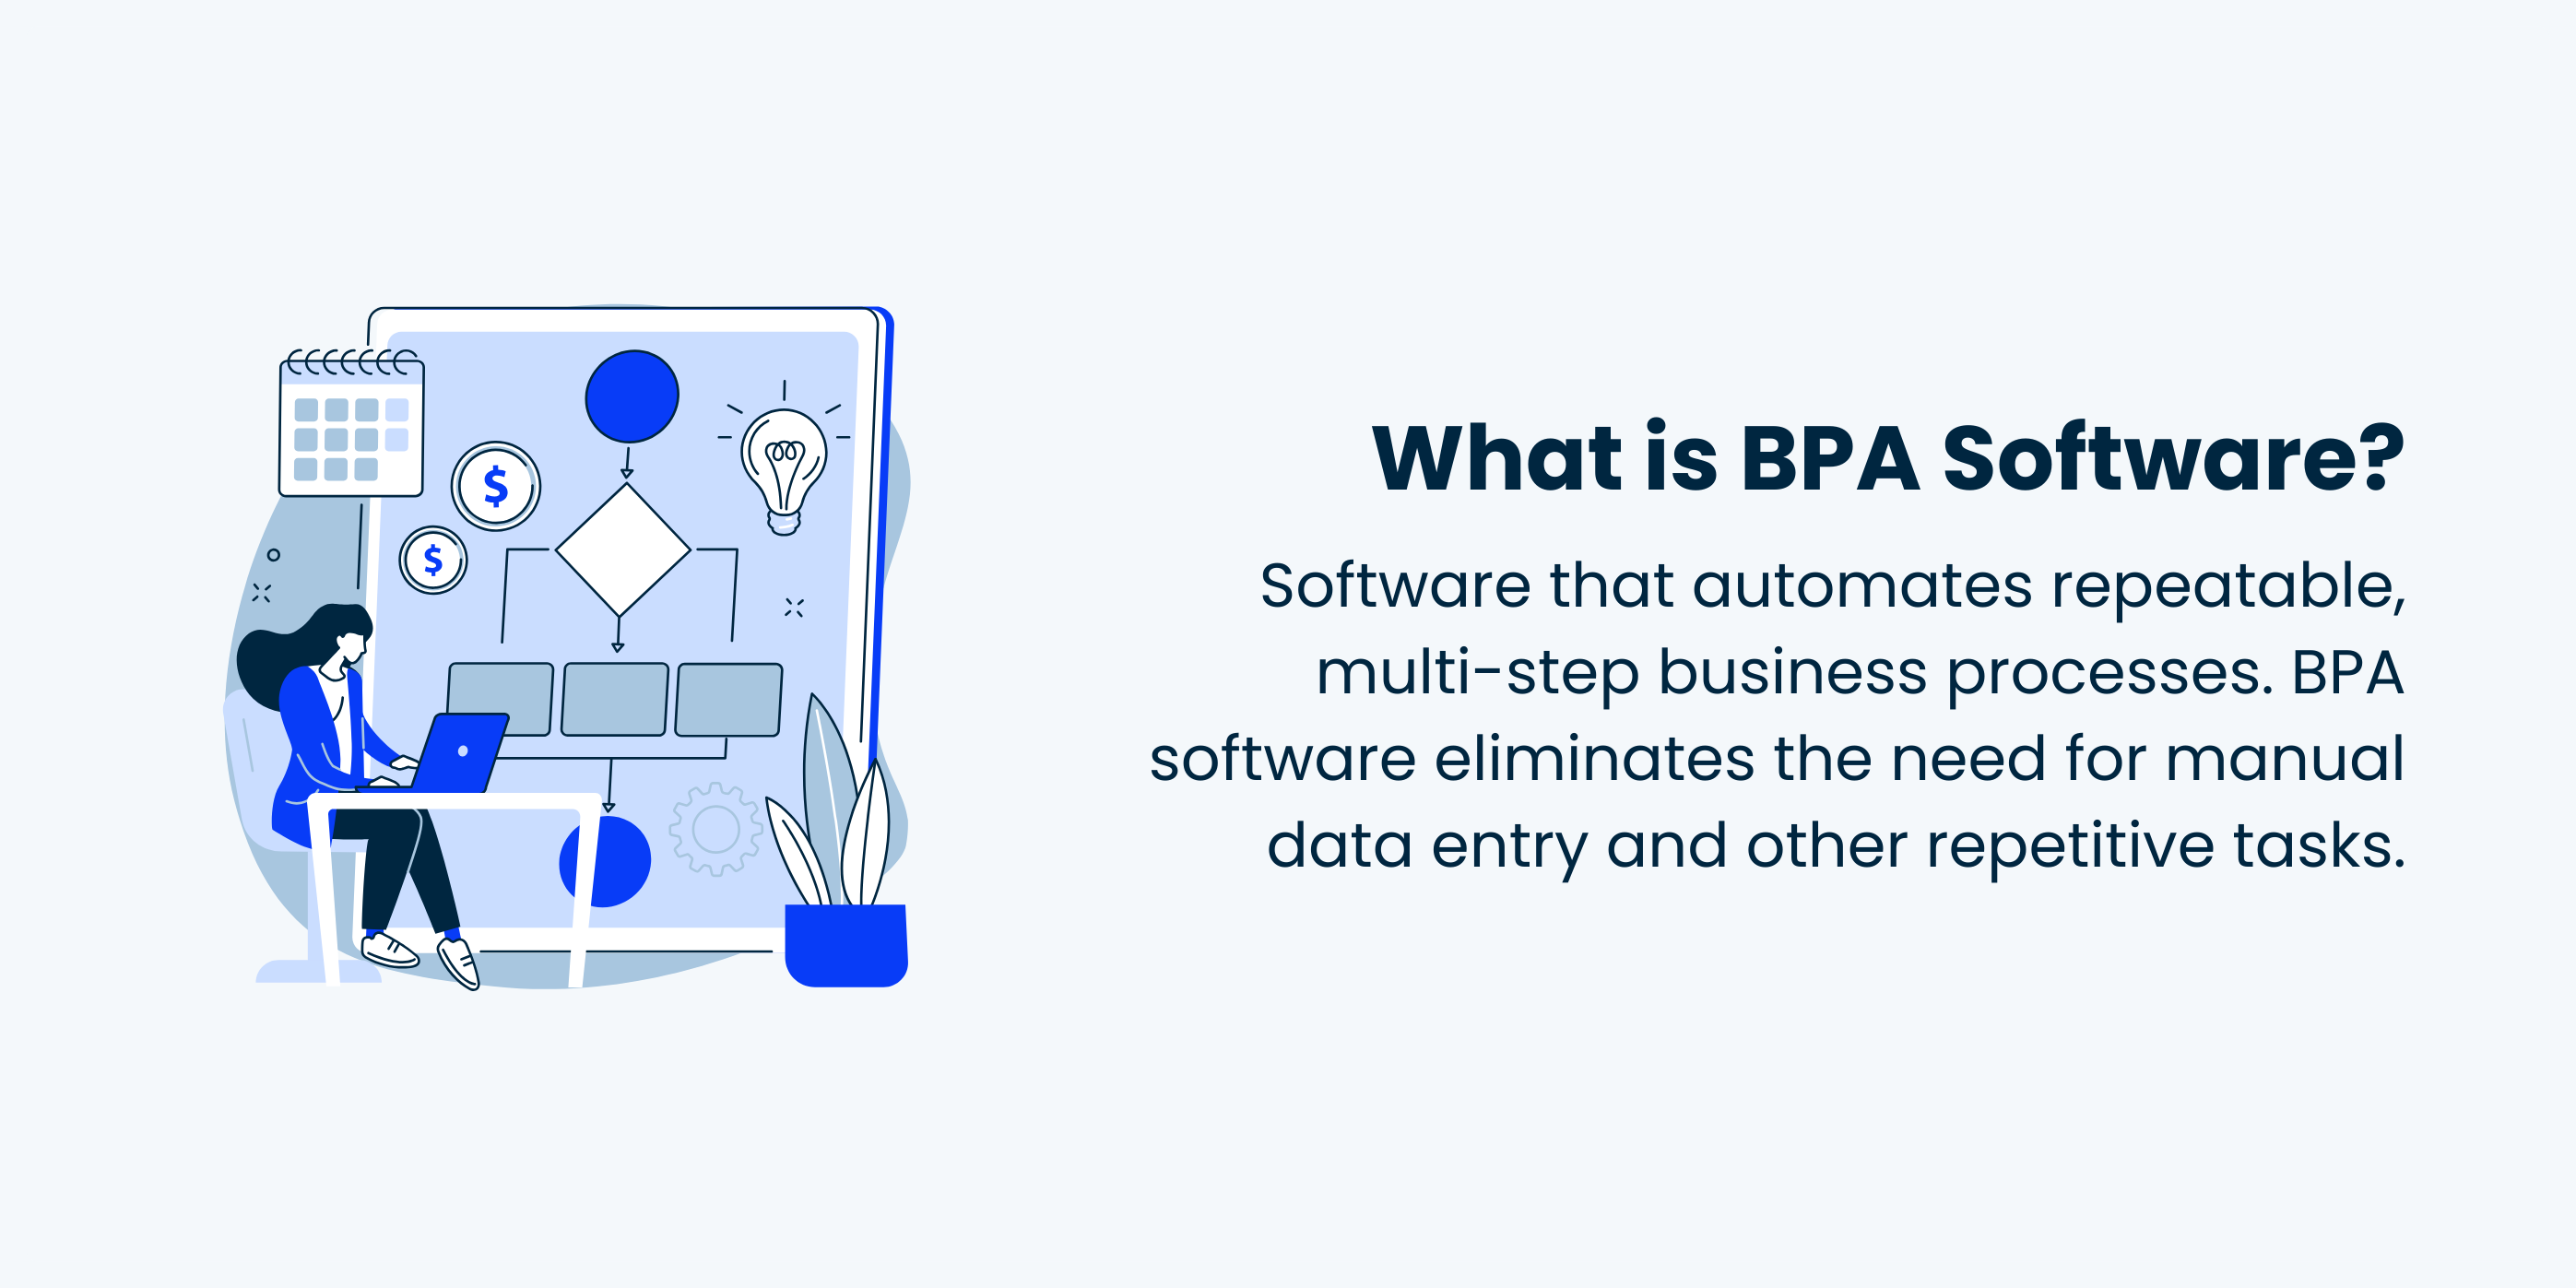 What is BPA Software